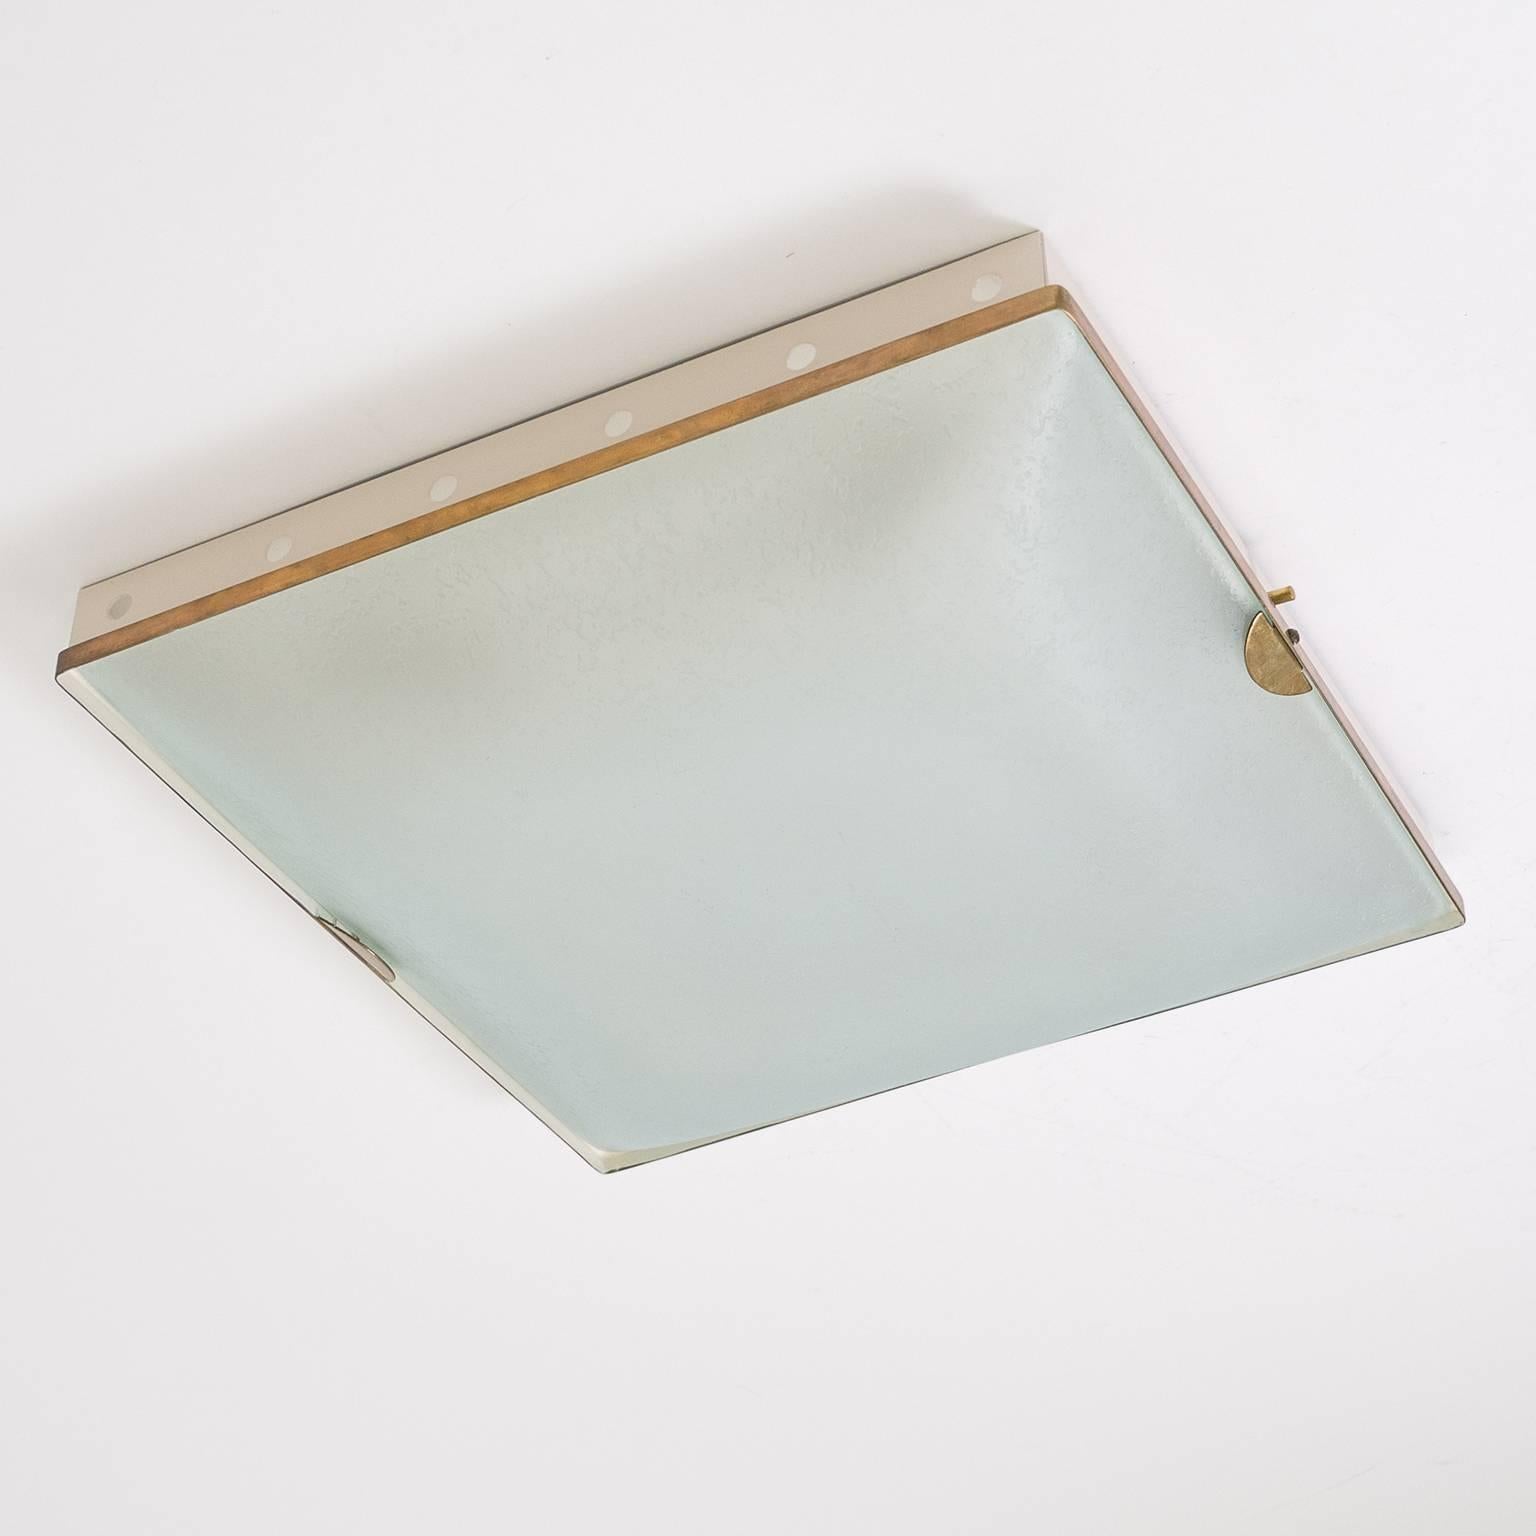 Excellent Fontana Arte flush mount (Model 1940), circa 1960. An off-white lacquered backplate with a brass rim holds a textured and satinated curved glass difusor. Four E14 sockets with new wiring.